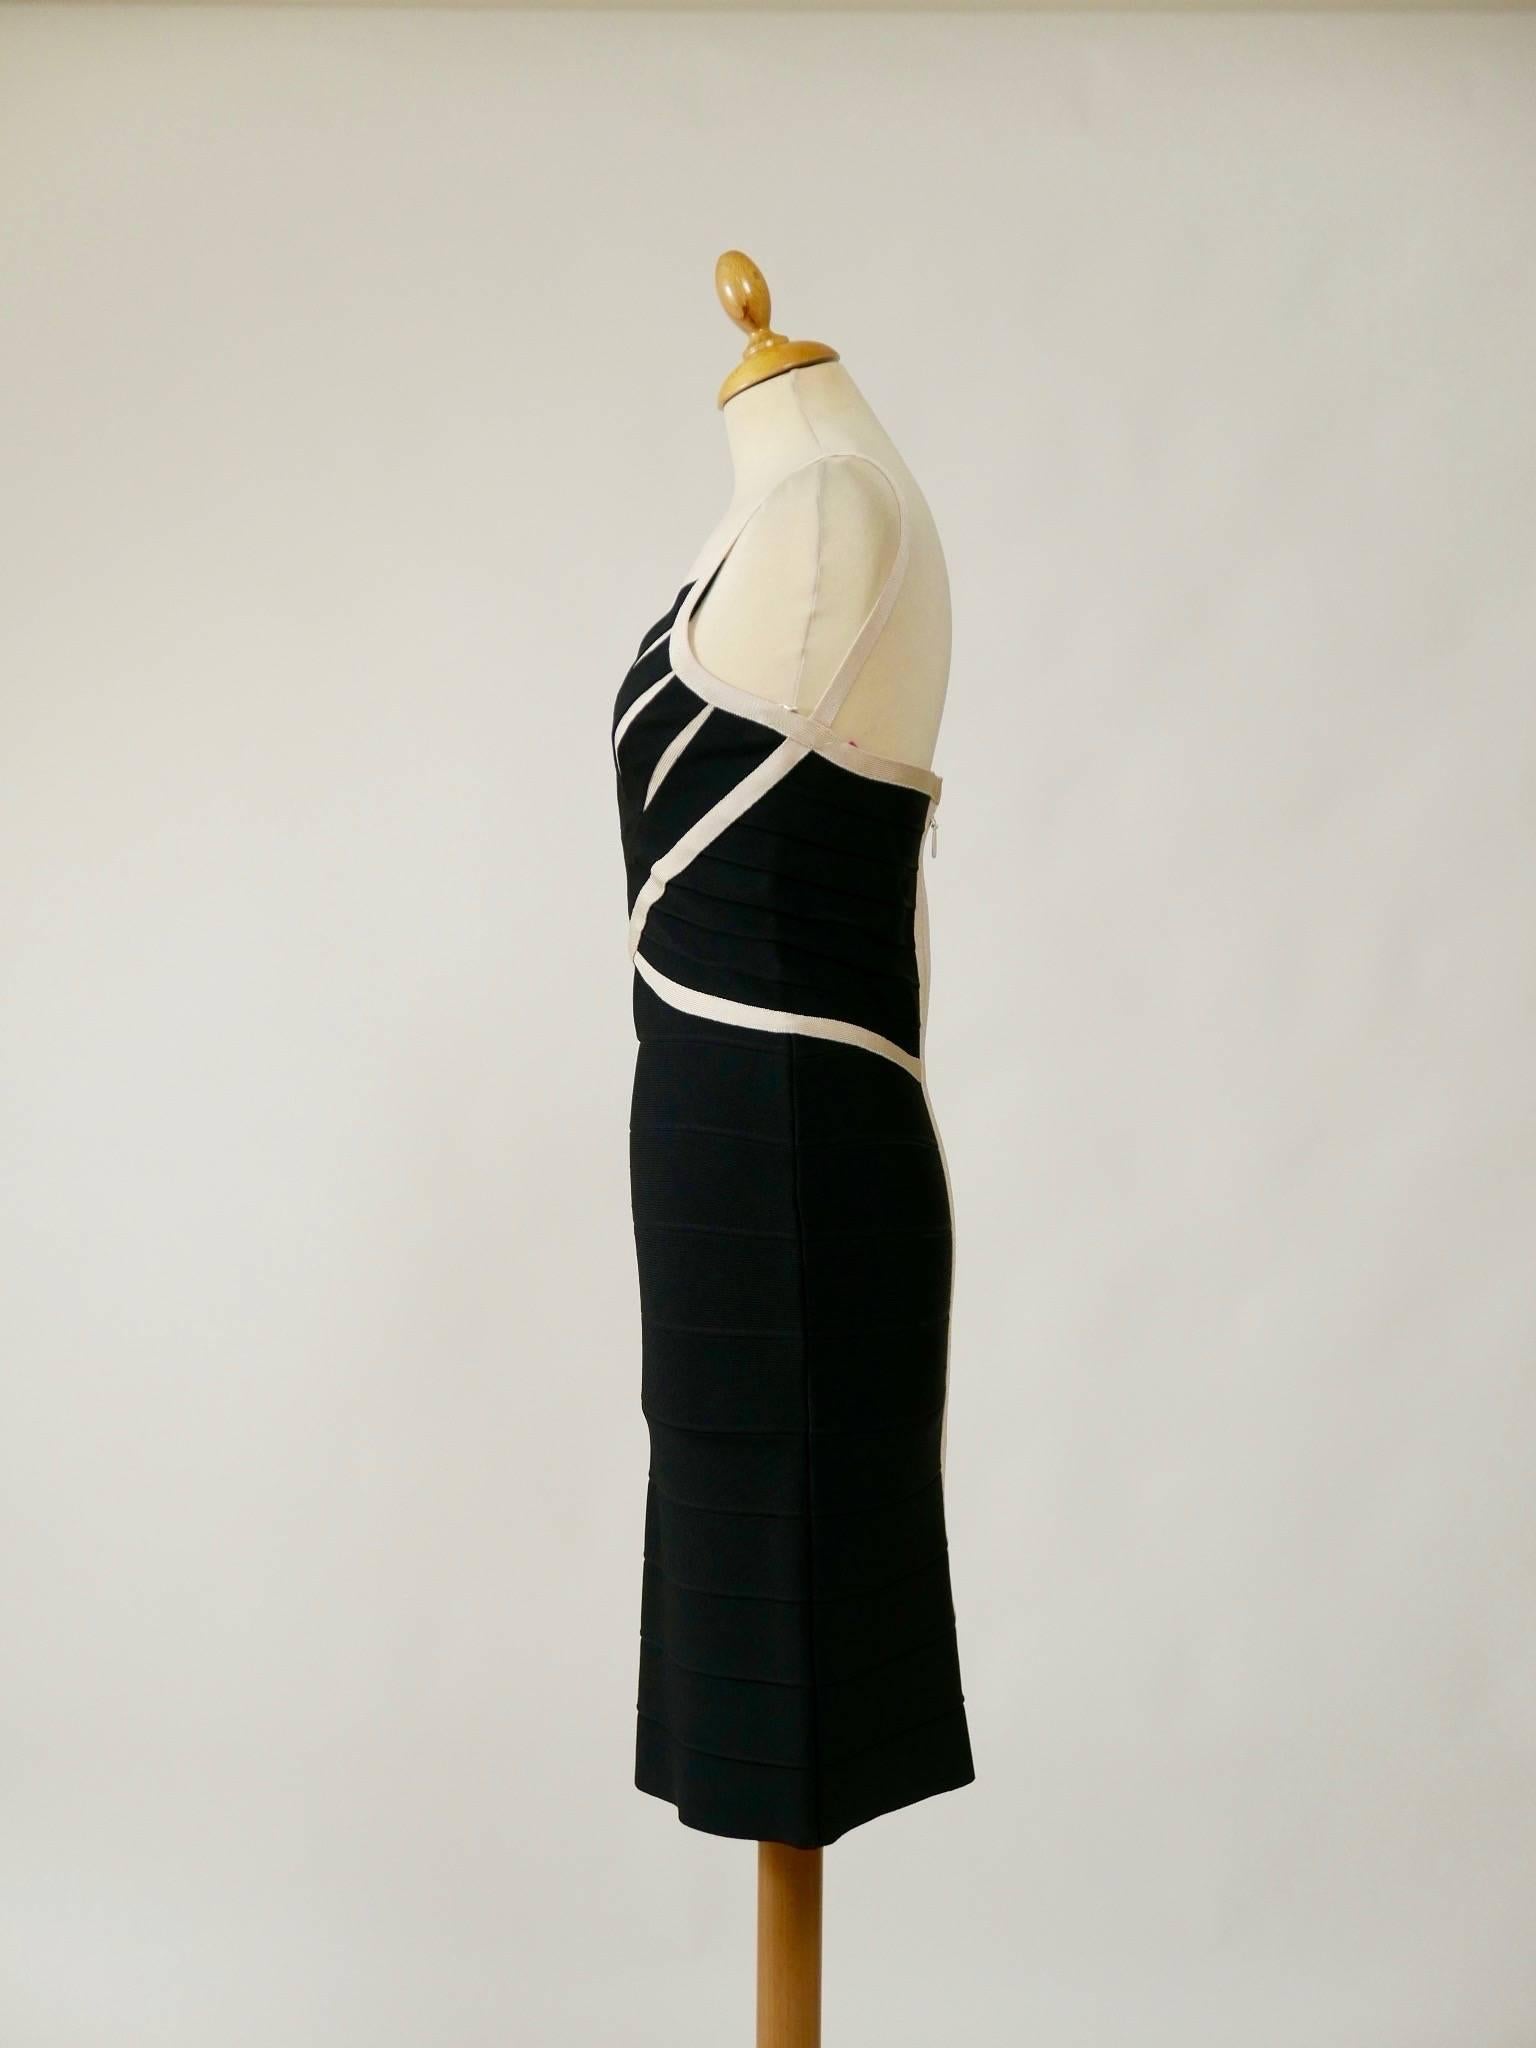 This bombshell Herve Leger sexy dress is in black and white asymmetric bandage and jersey fabric. It has hourglass line and back zip closure. 

Measurement (unstretched):
Label size S
Estimeted size S
Bust 32 inch
Waist 24 inch
Hips